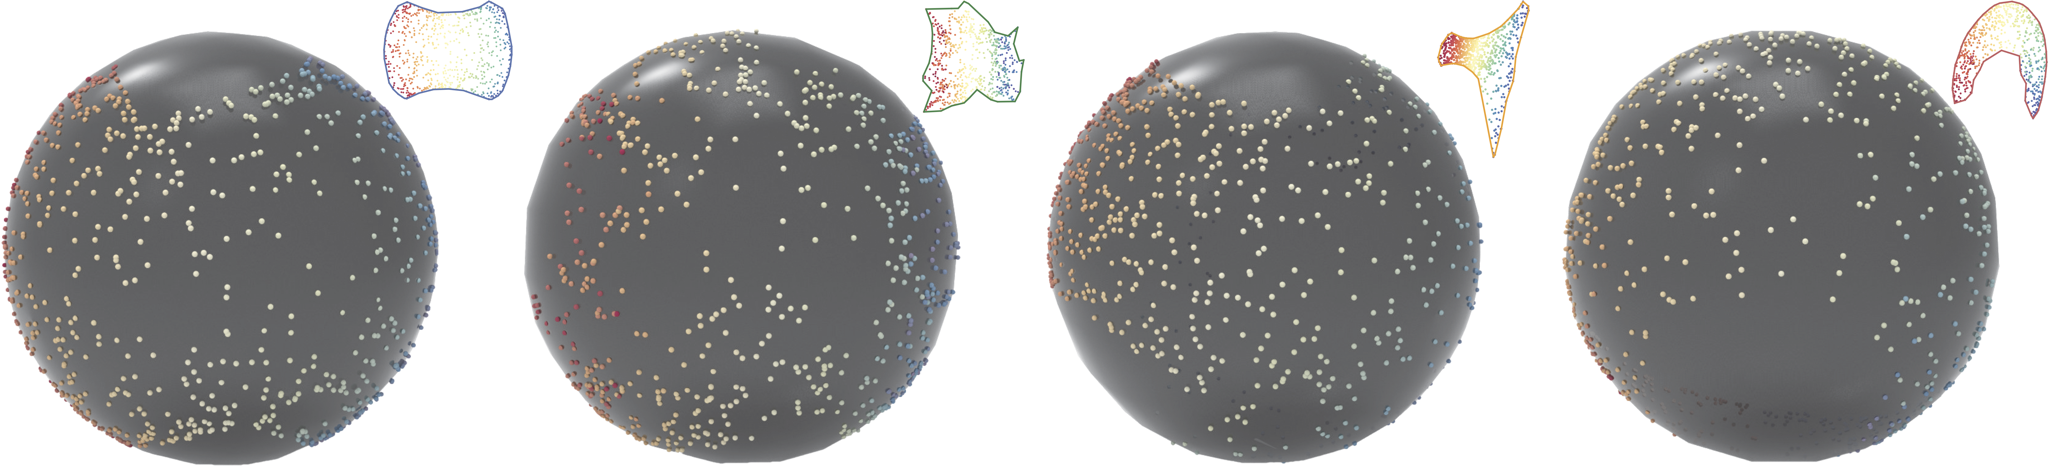 Spherical mapping results